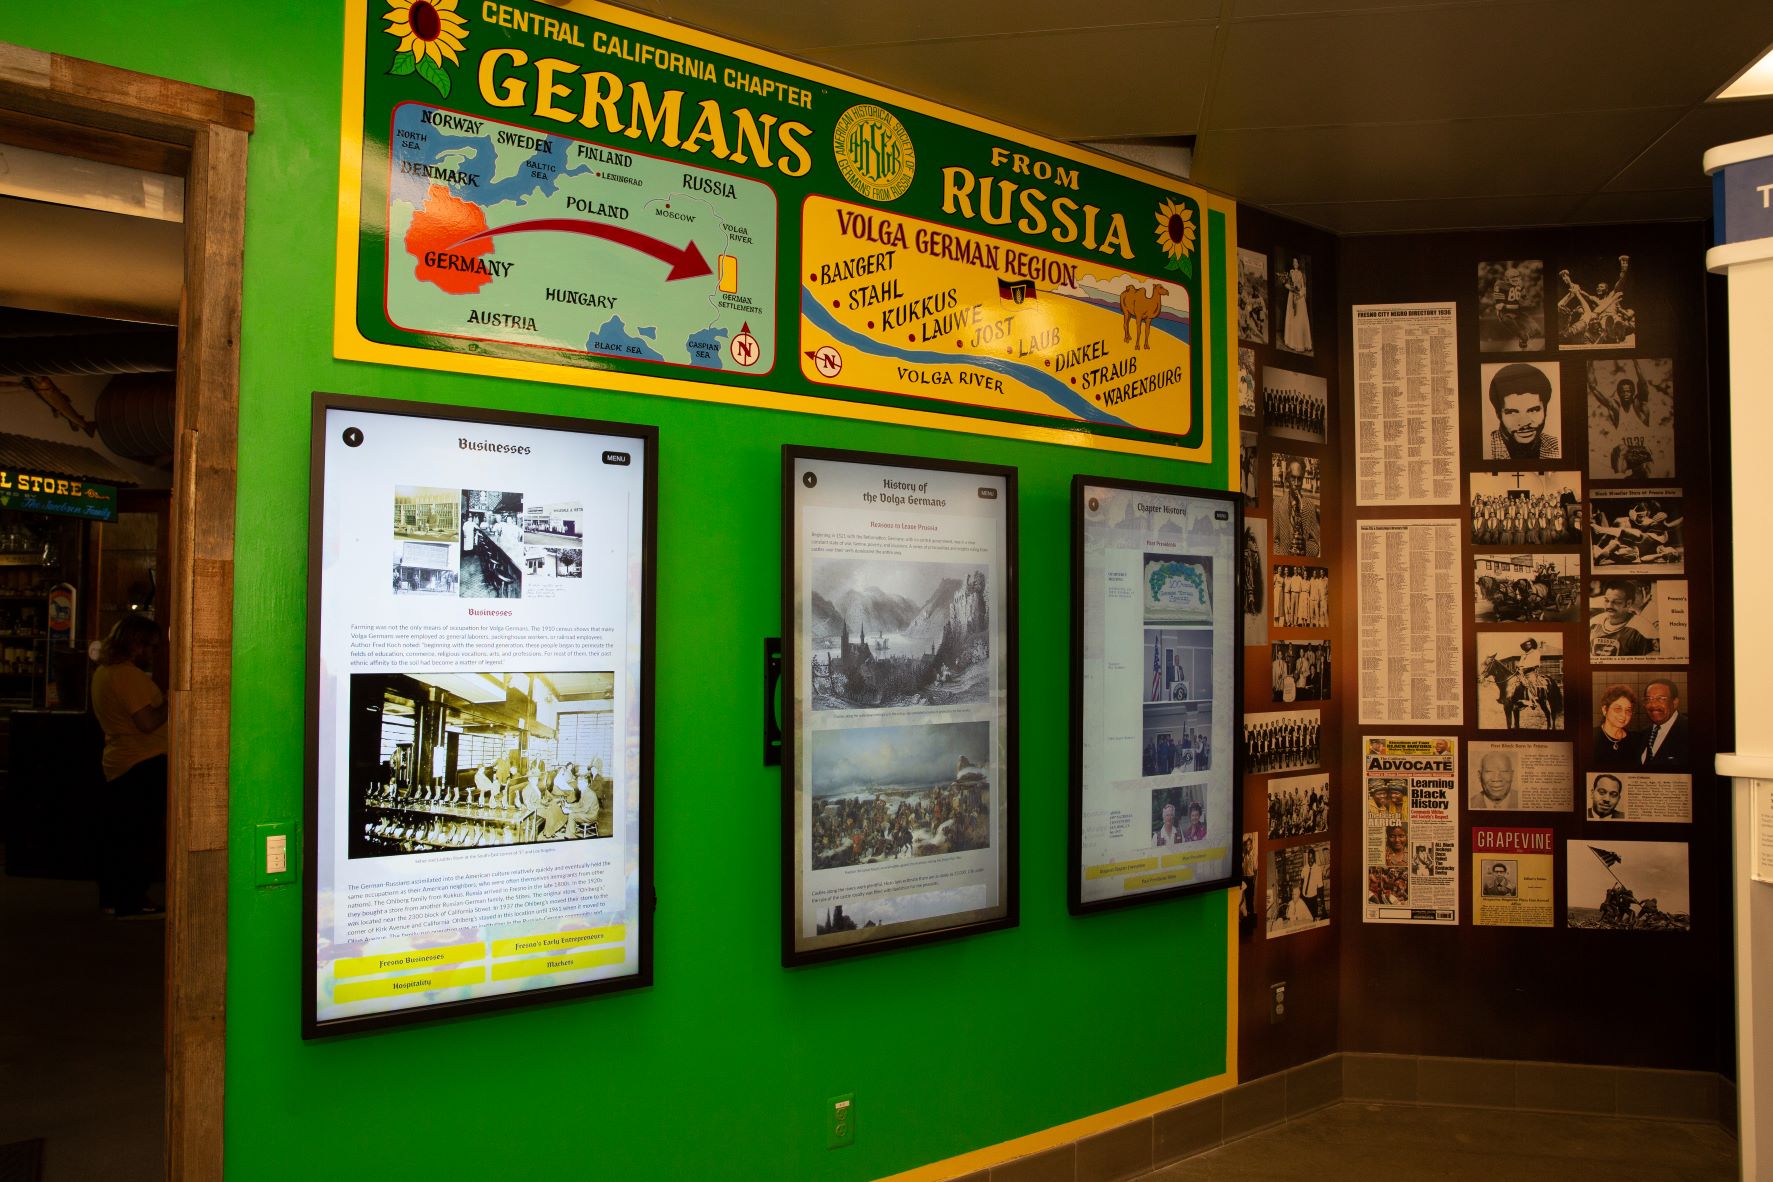 German-Russia exhibit in the Cultural Community Center on first floor of Fresno County Historical Museum